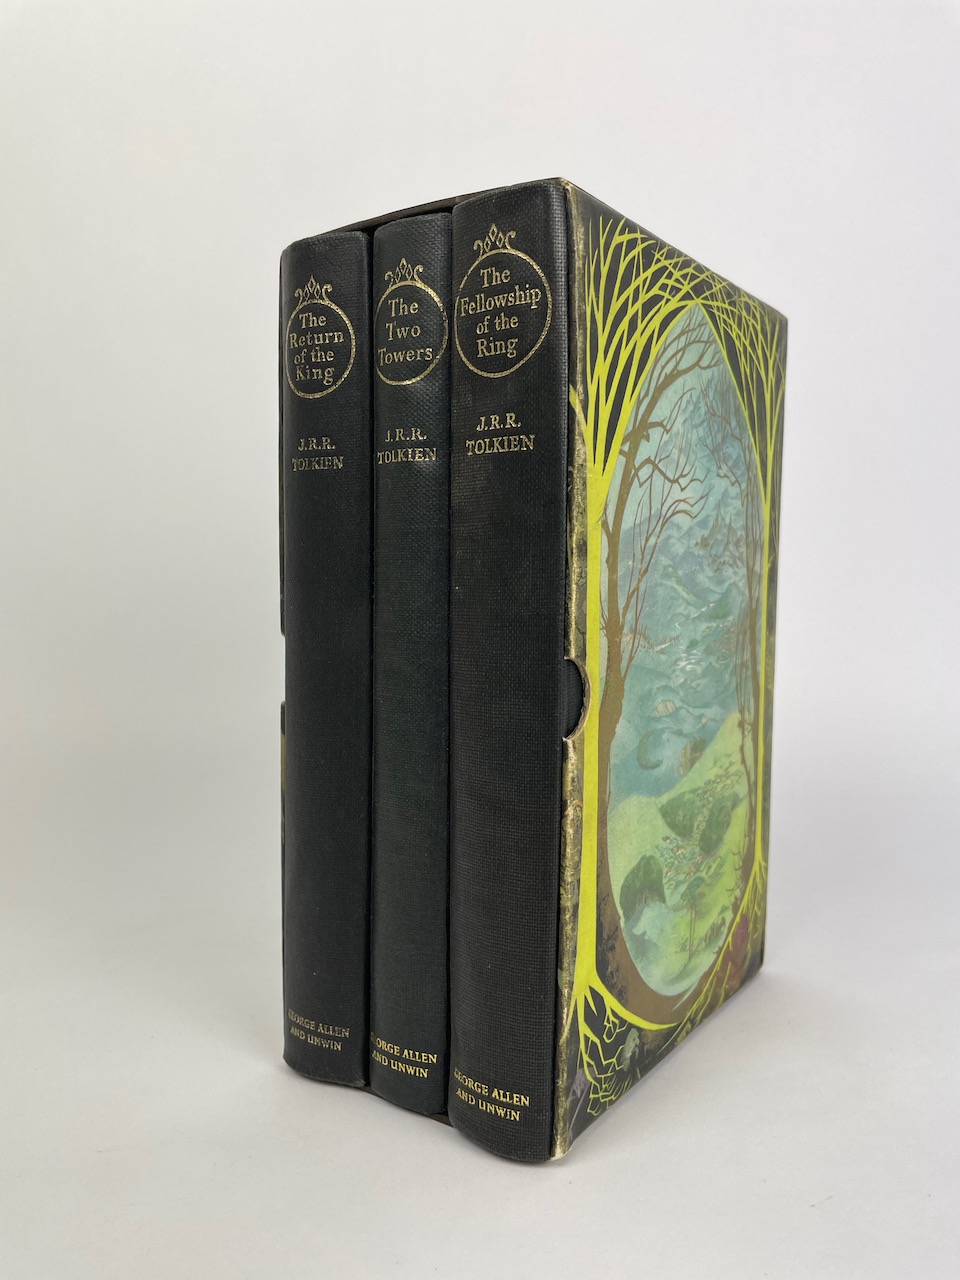 The true 1st Deluxe Edition of the Lord of the Rings, housed in the very scarce original publishers slipcase featuring the Pauline Baynes color triptych artwork